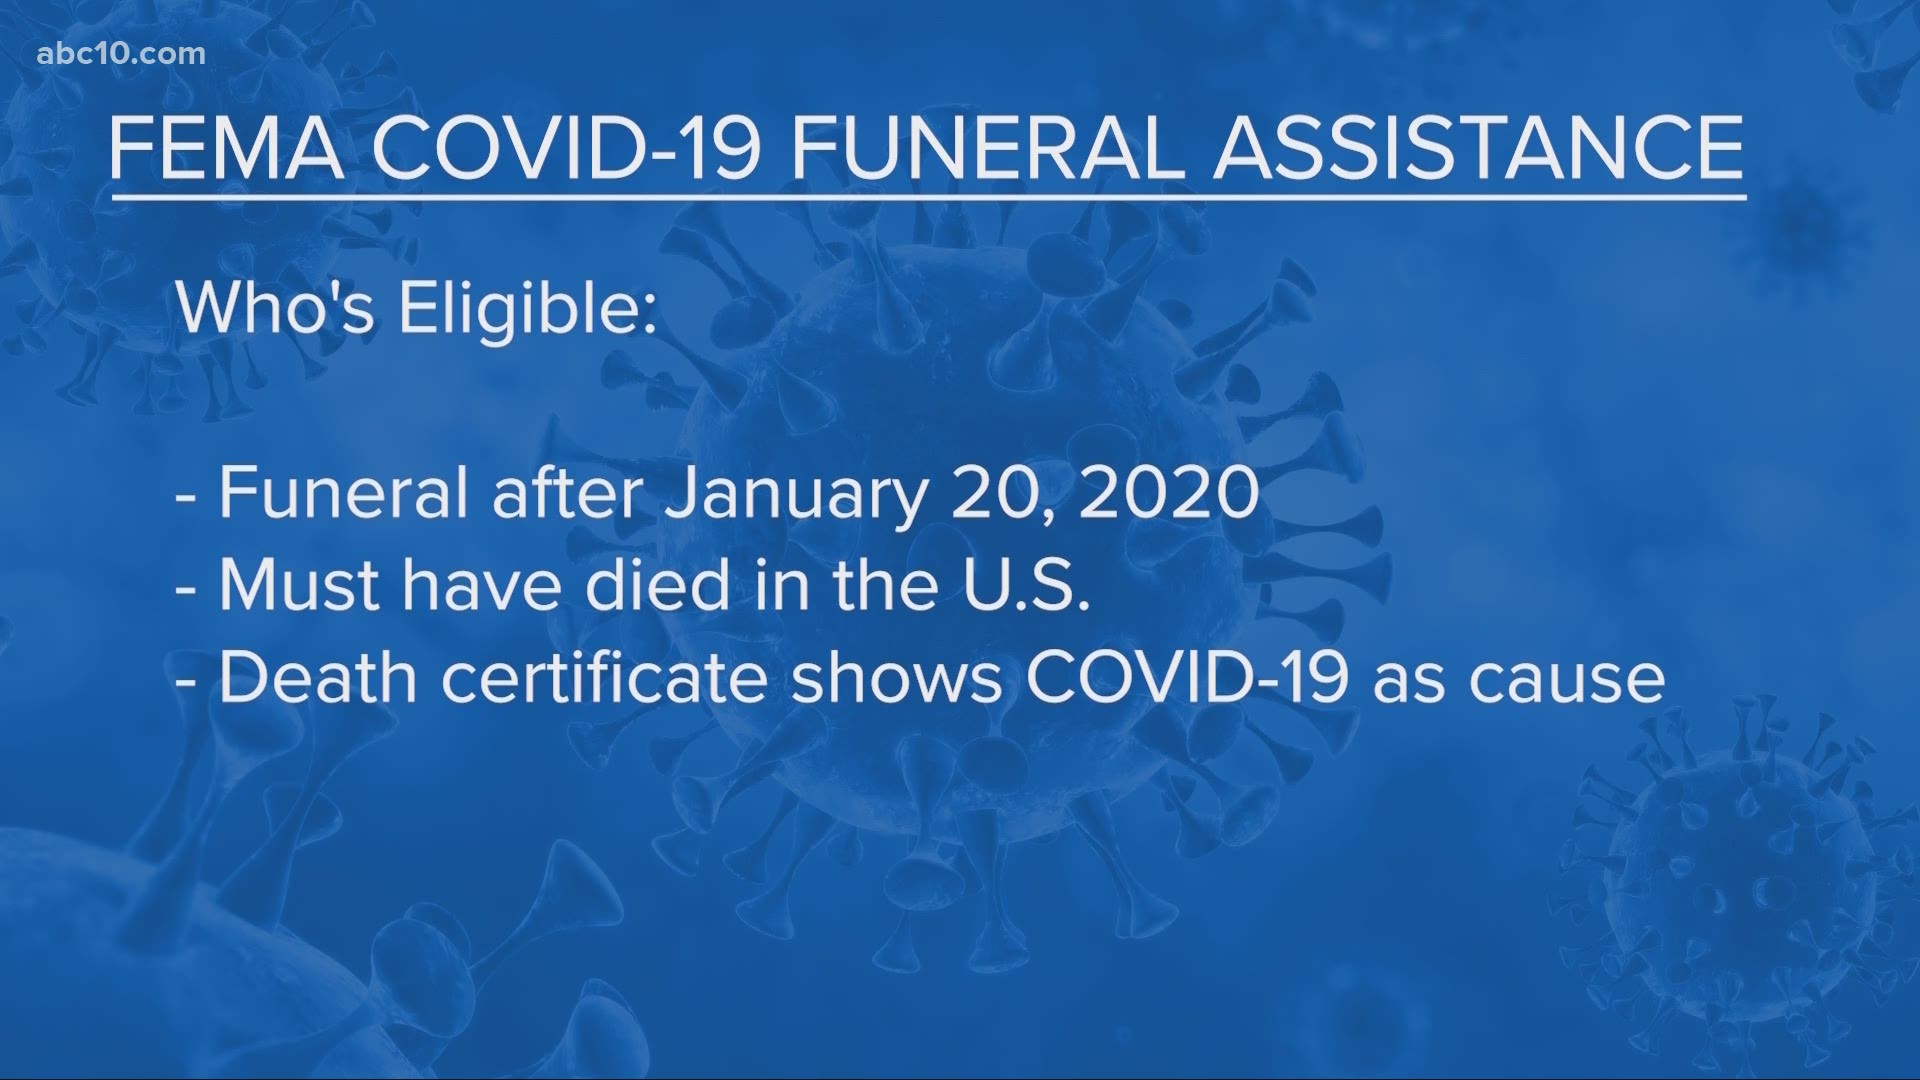 You could get up to $9,000 to cover funeral expenses if your loved one has died of coronavirus.